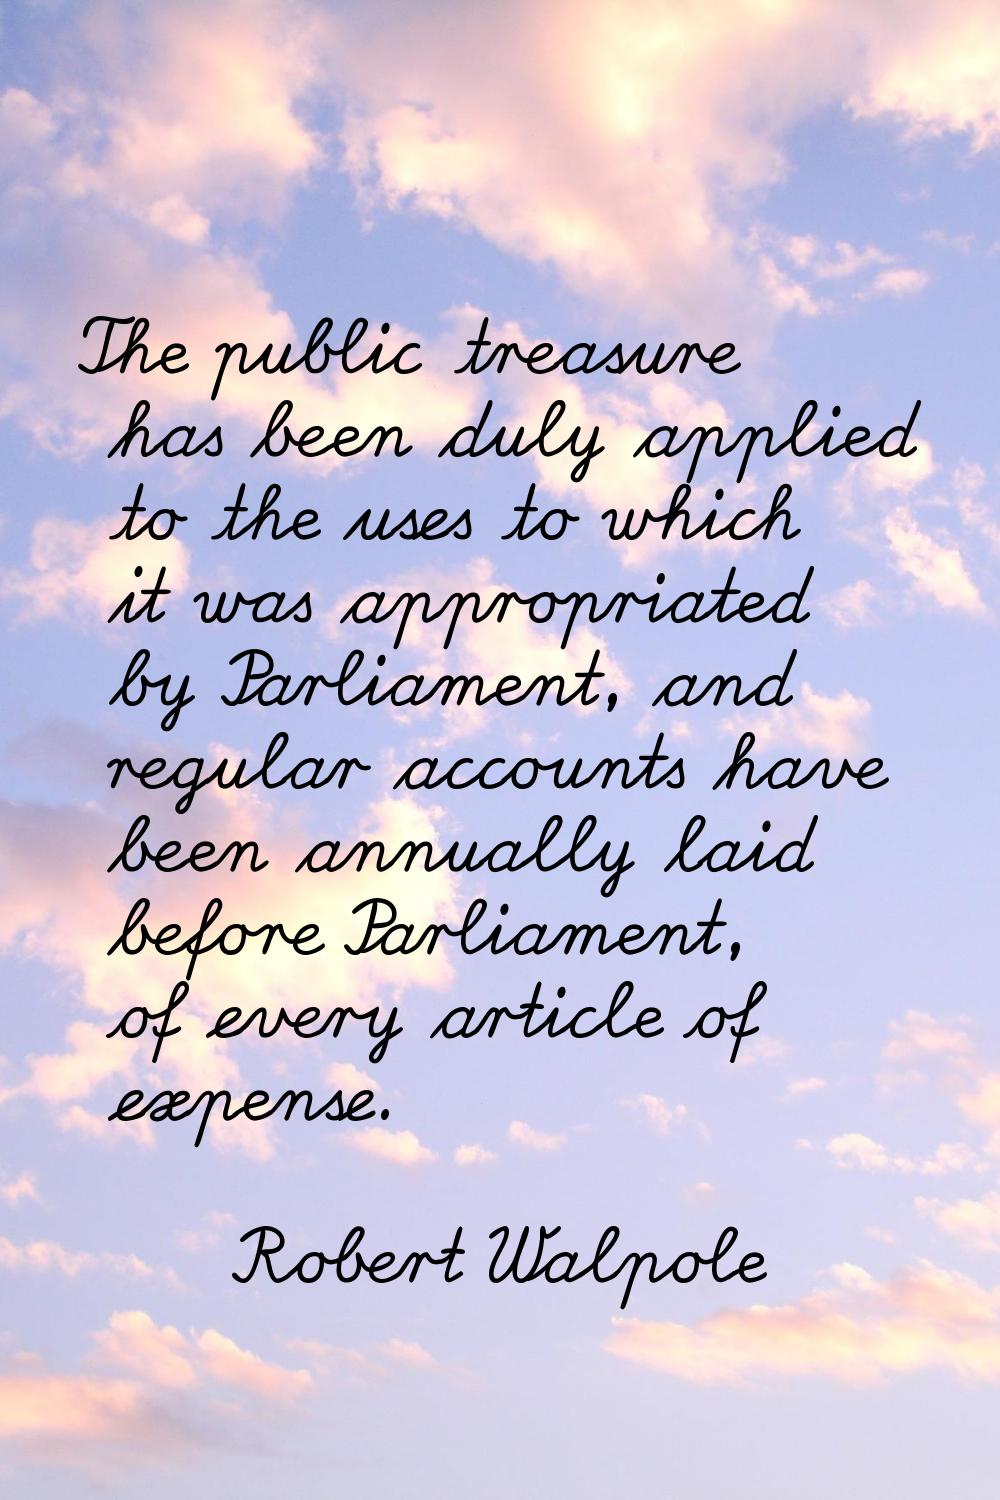 The public treasure has been duly applied to the uses to which it was appropriated by Parliament, a